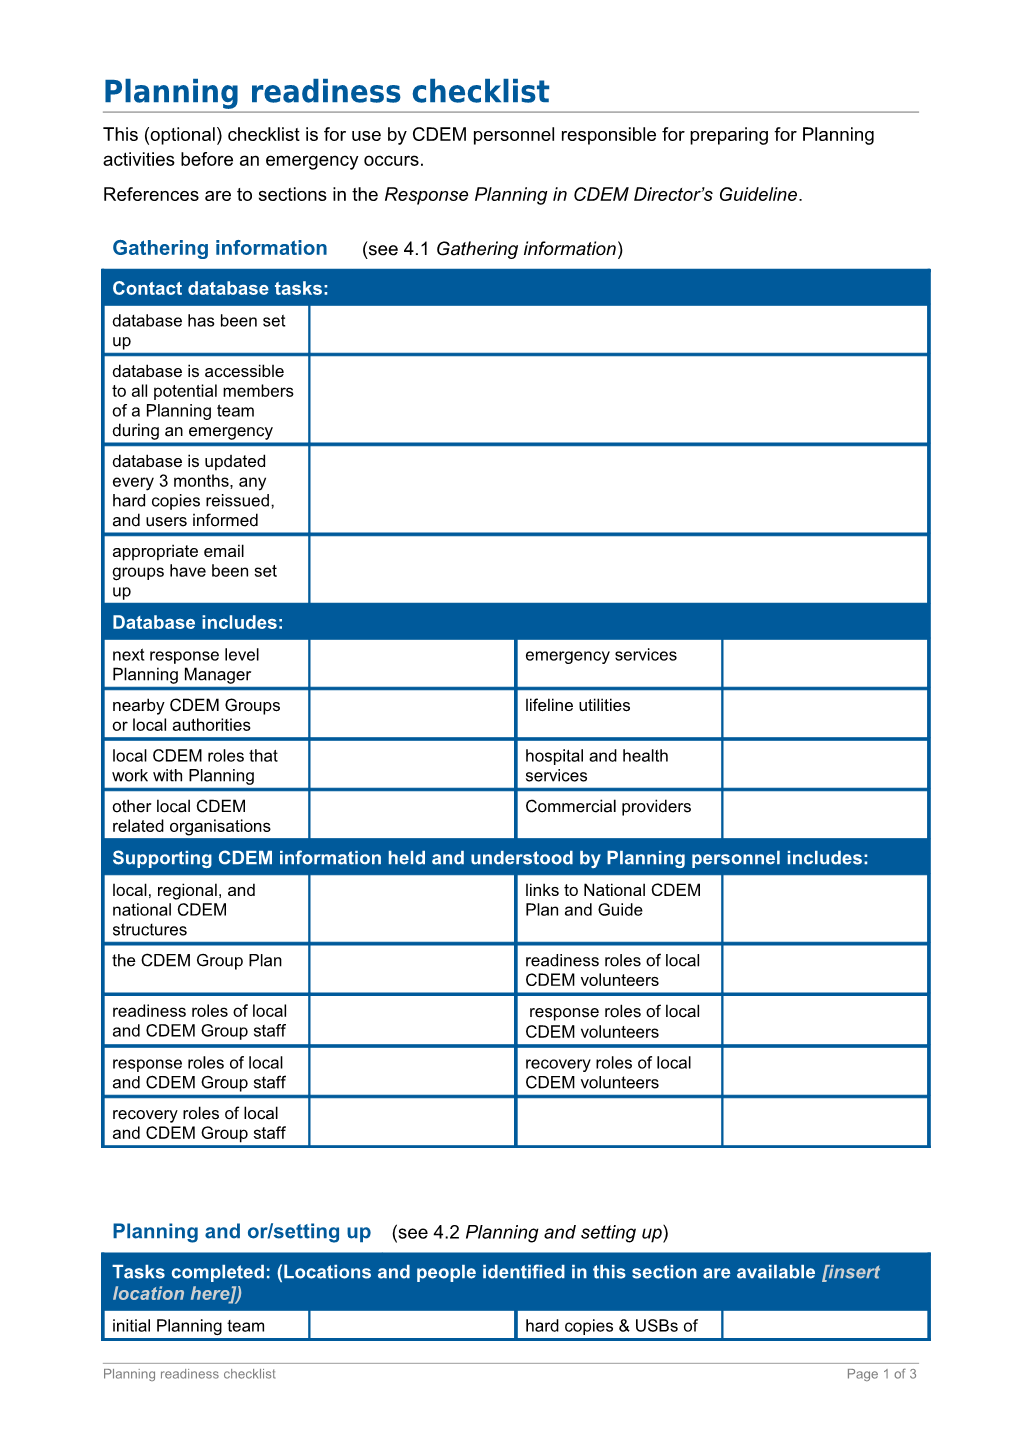 Response Planning in CDEM - Planning Readiness Checklist - Ministry of Civil Defence &